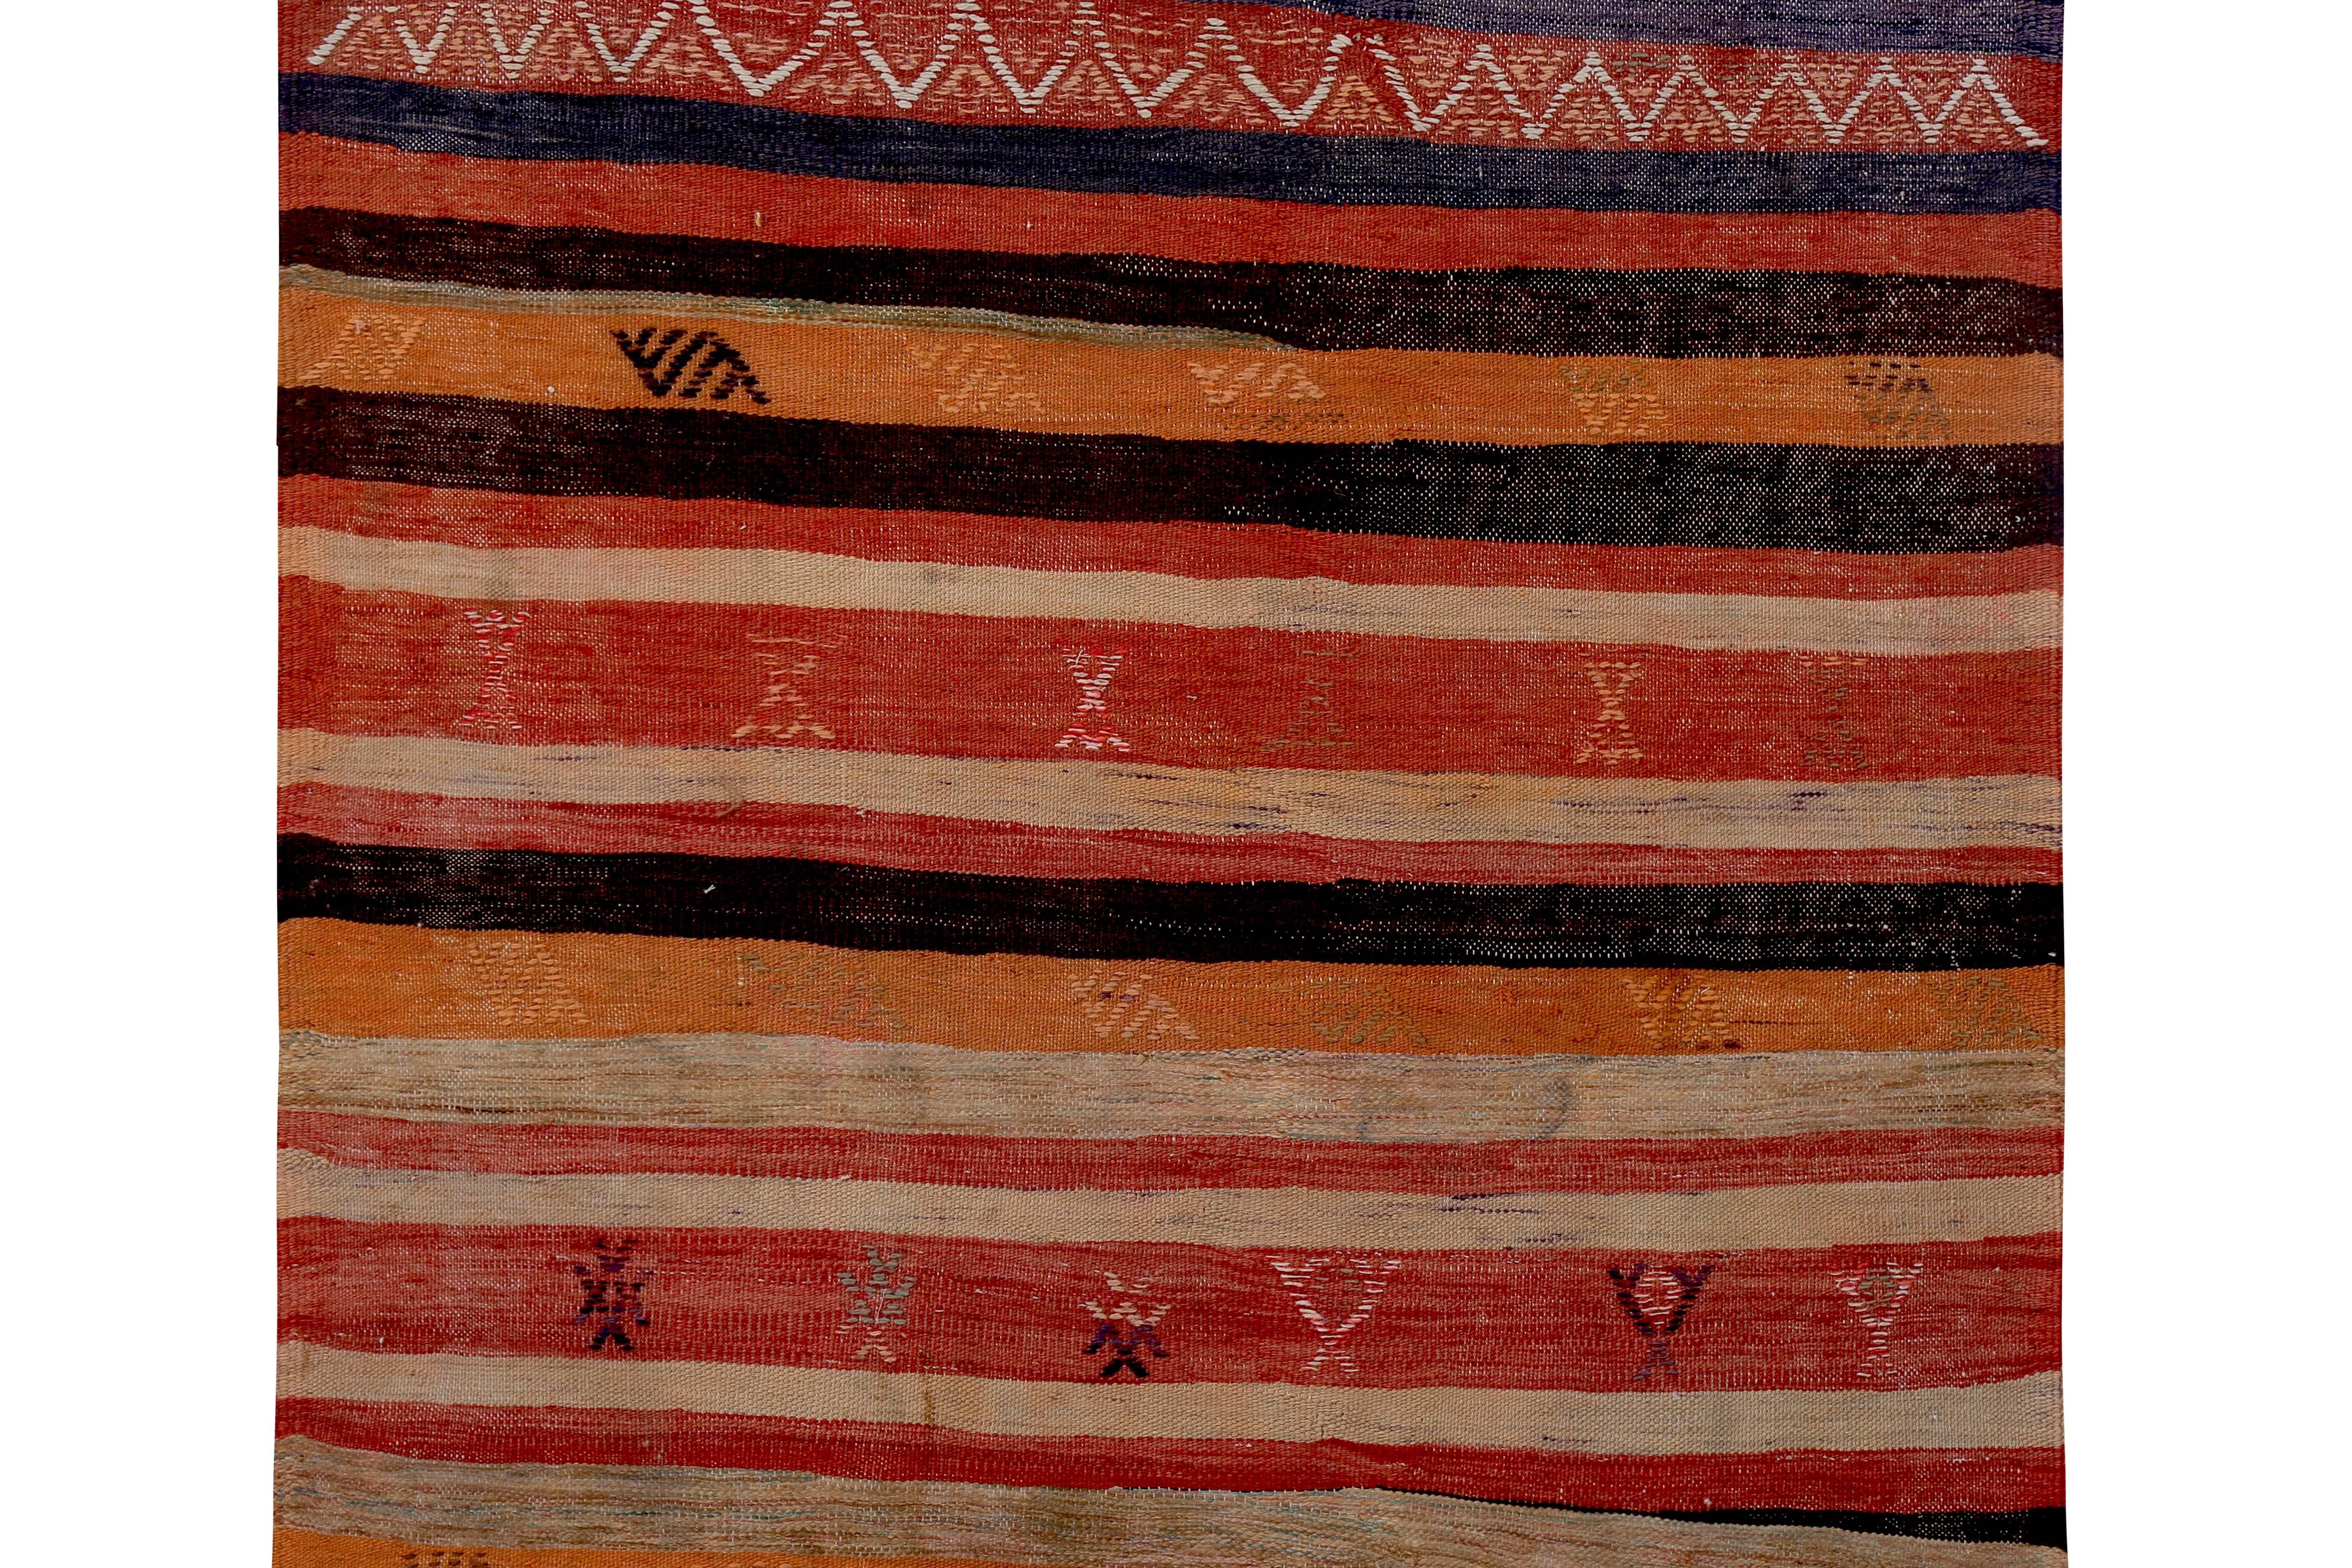 Hand-Woven Turkish Kilim Runner Rug with Red and Orange Stripes and Tribal Patterns For Sale